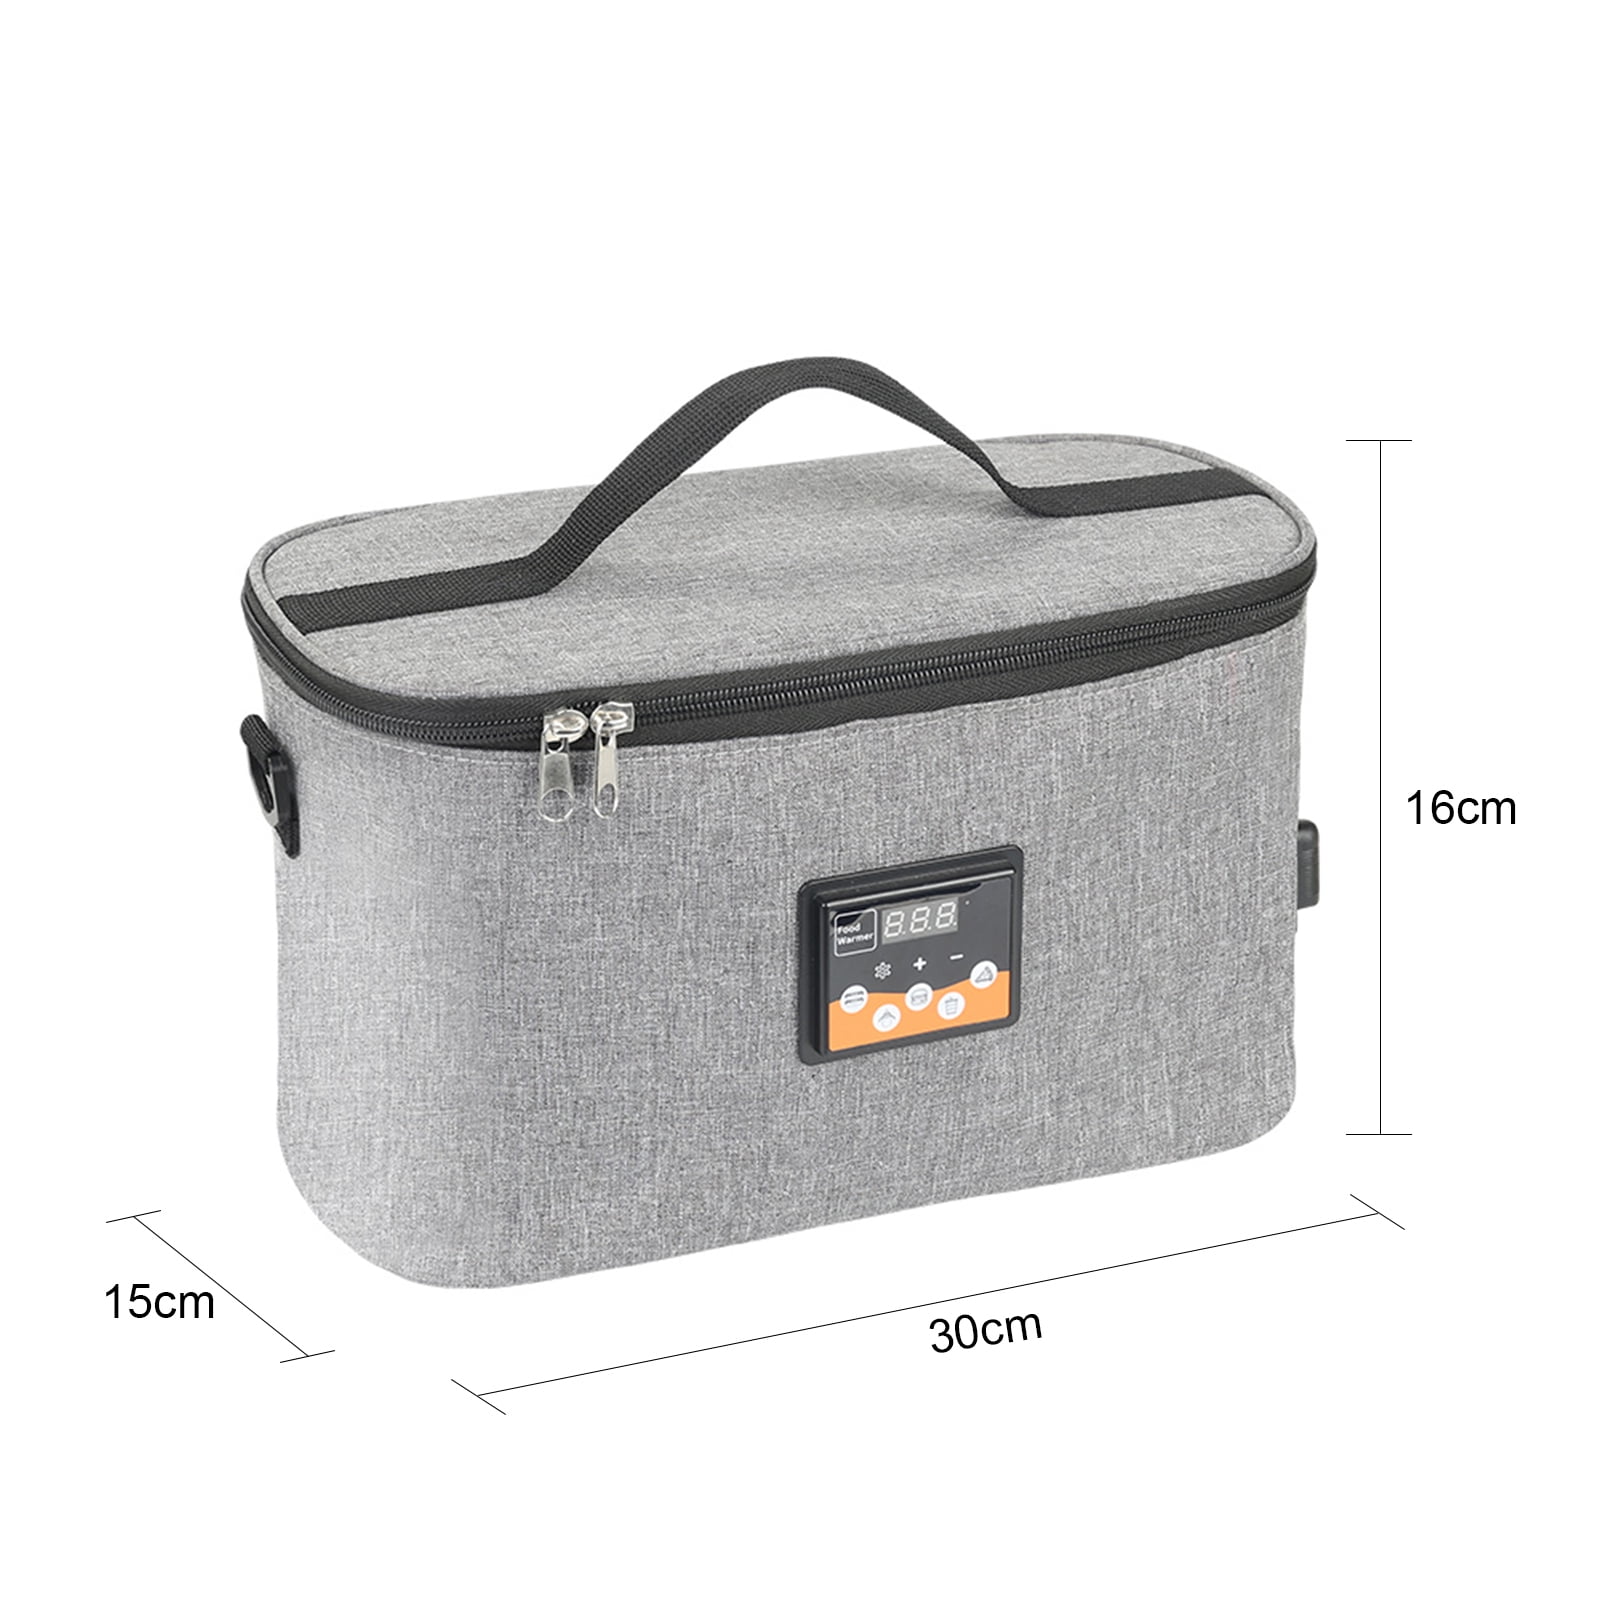  Portable Oven,12 V Car Food Warmer Portable Mini Microwave  Electric Food Heated Picnic Box Lunch Box 11.0x7.9x4.7in for Business Trip  Travel,Camping : Home & Kitchen